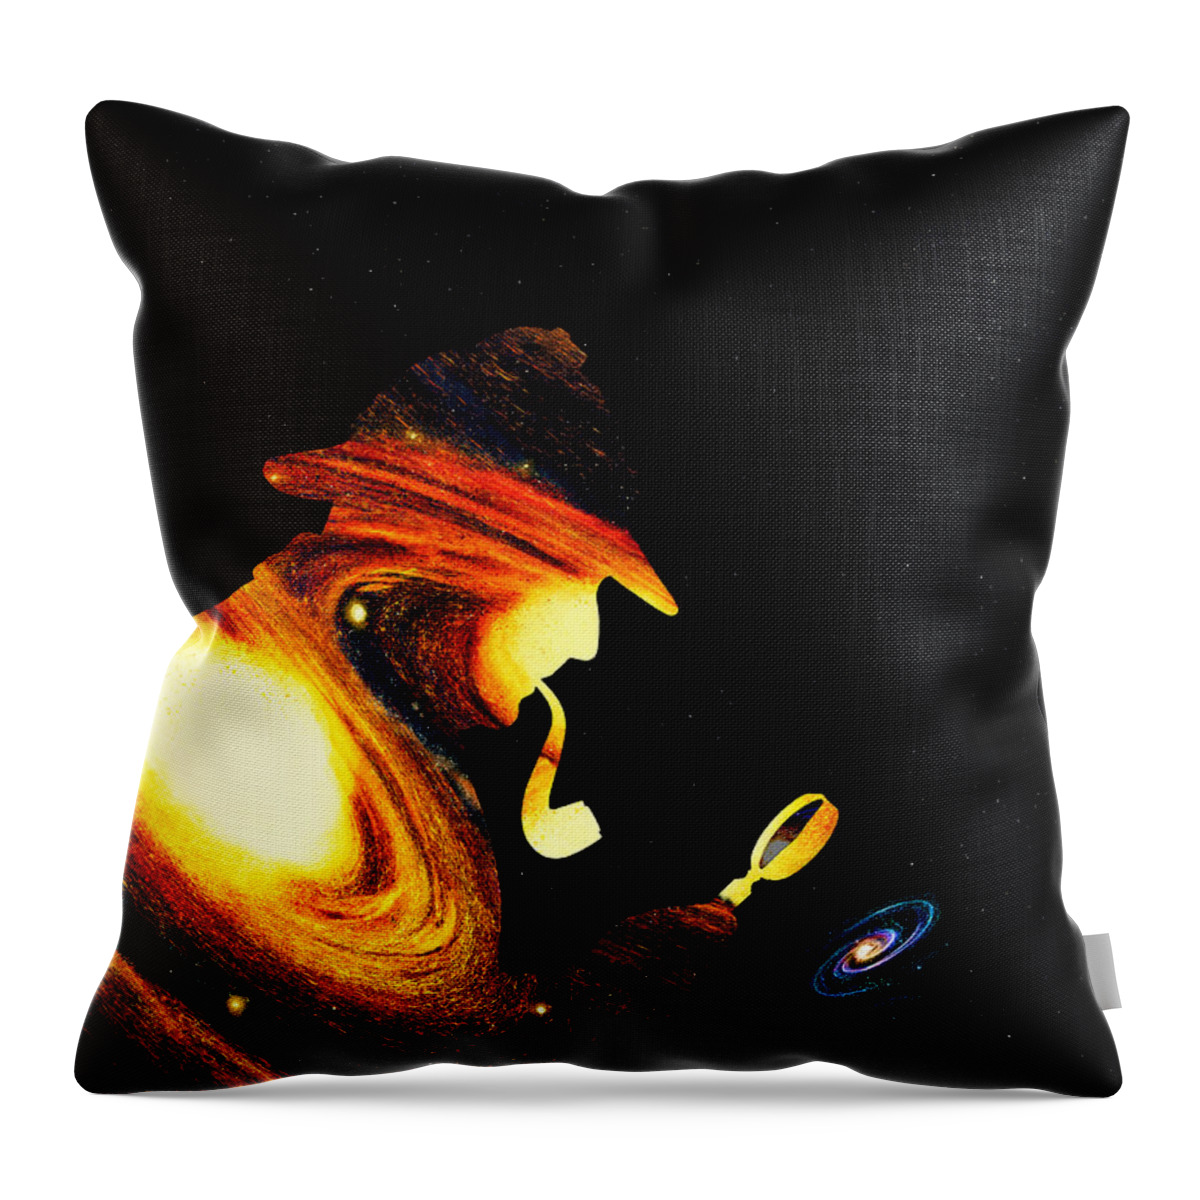 Sherlock Throw Pillow featuring the digital art Sherlock Holmes The Great Mystery by Nicebleed 